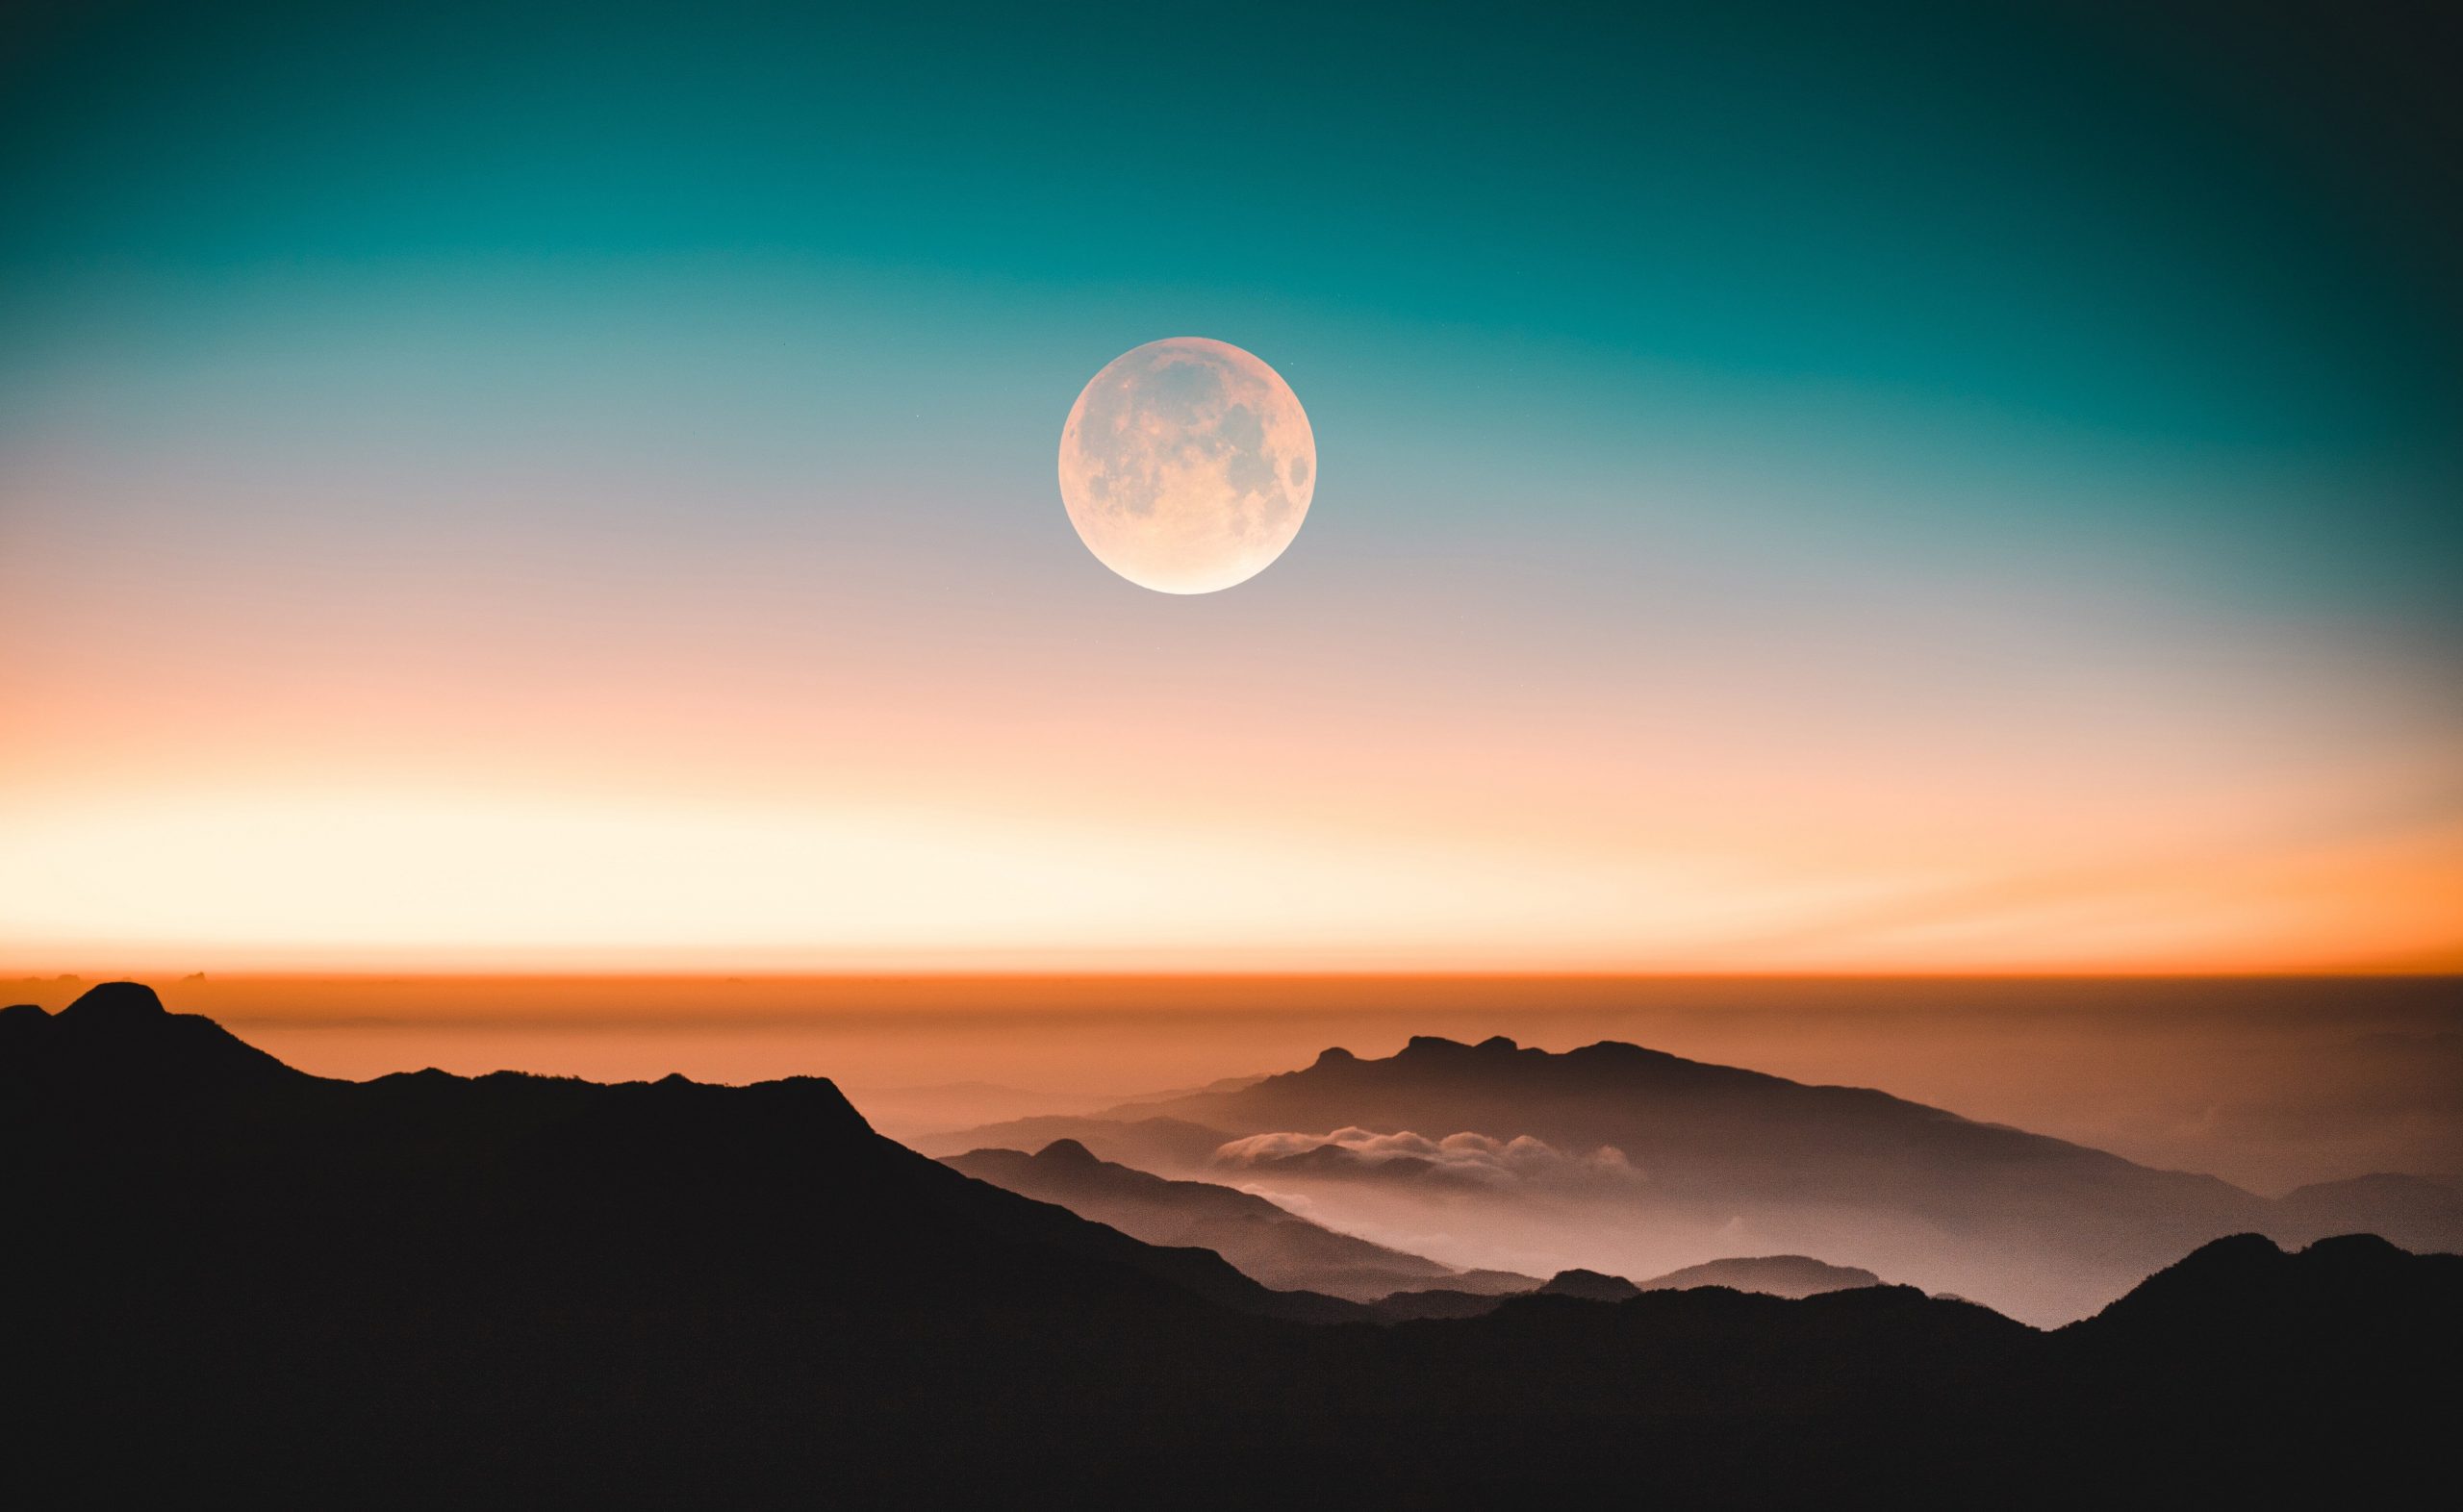 Why does the moon appear larger on horizon?